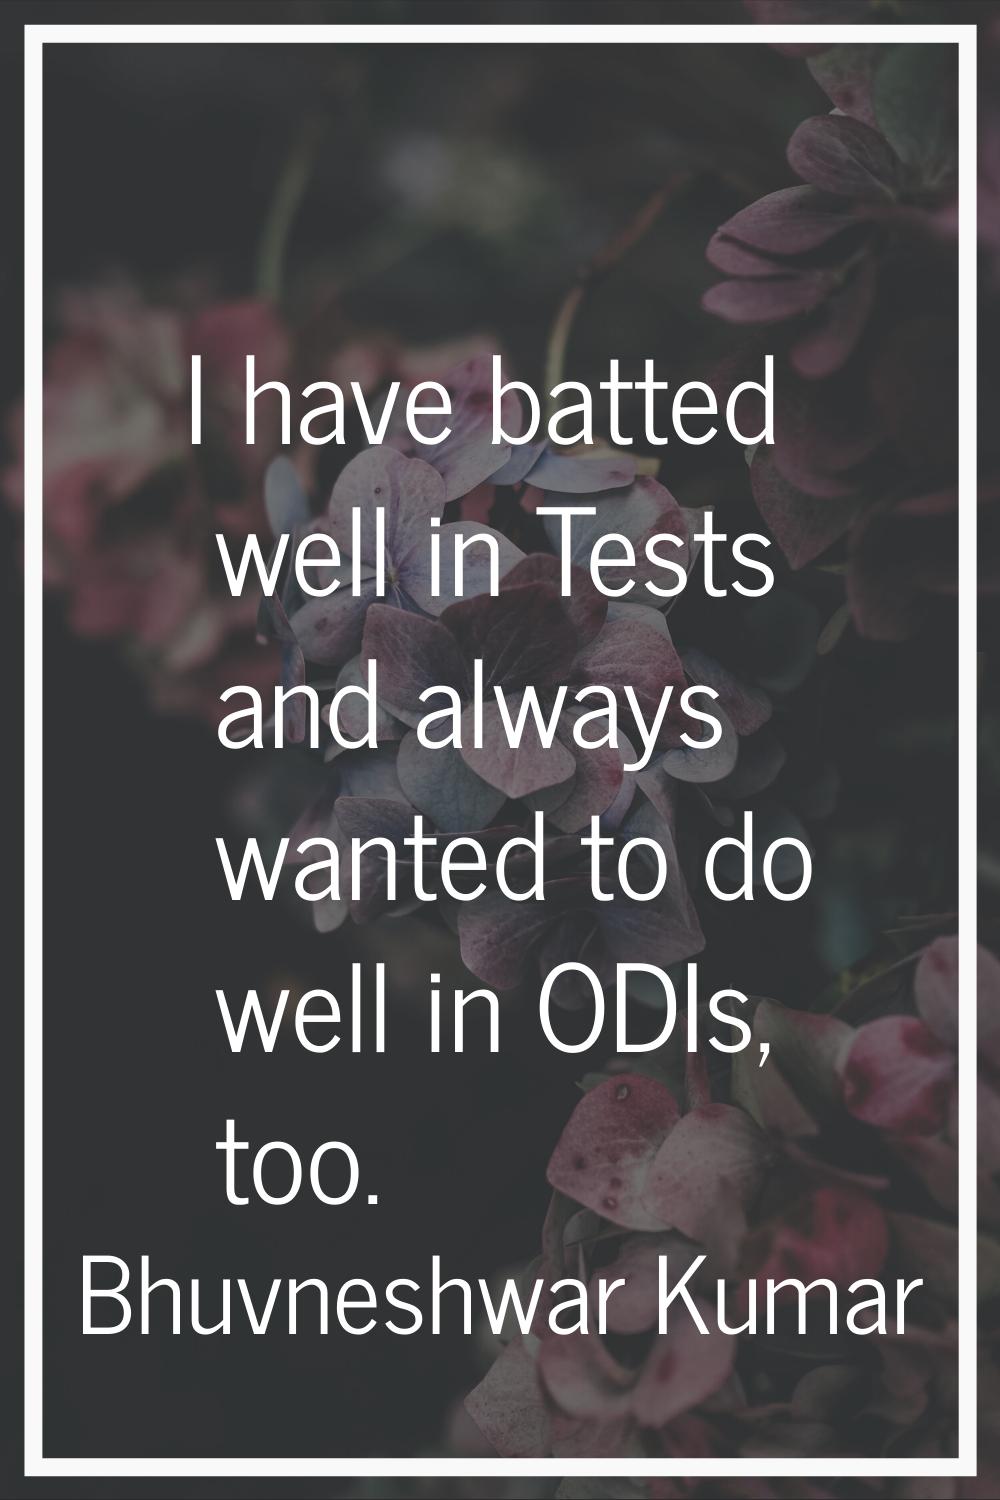 I have batted well in Tests and always wanted to do well in ODIs, too.